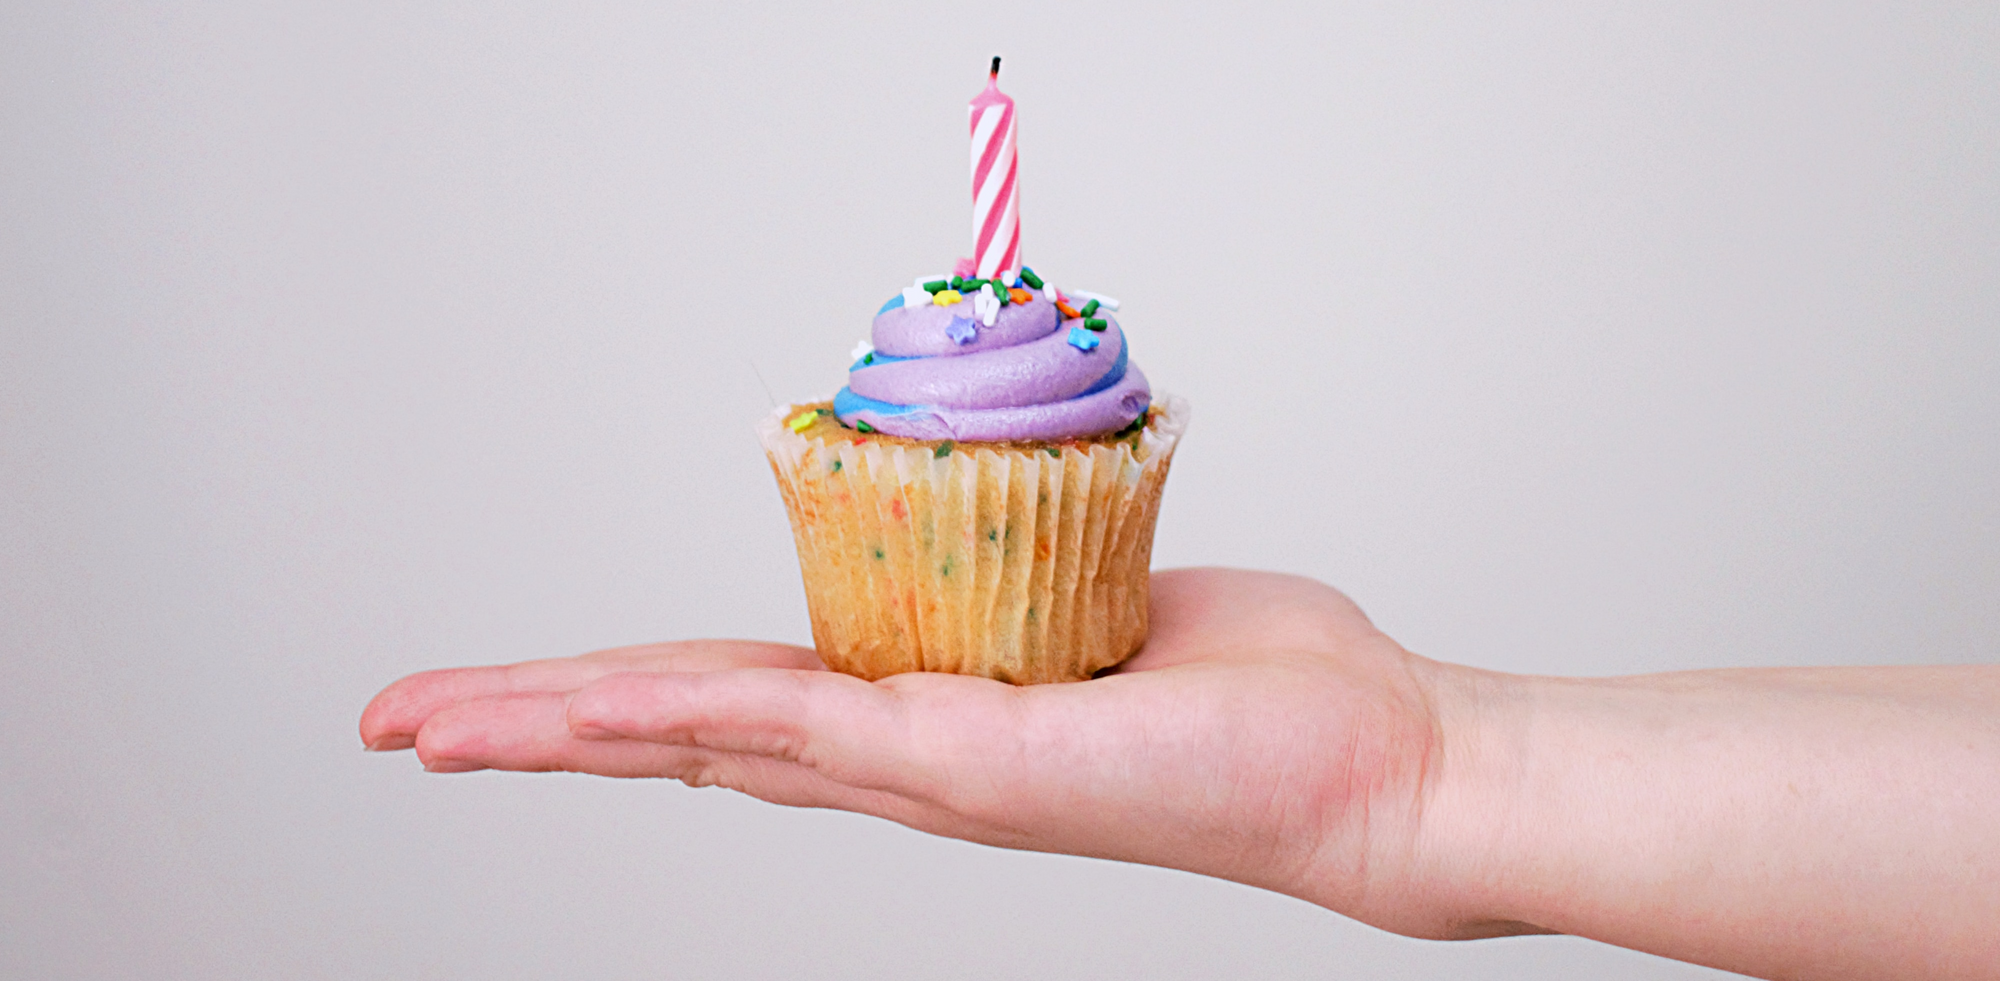 Lolli's 5th Birthday Bash: Get the Highest Rewards Rates at Top Brands